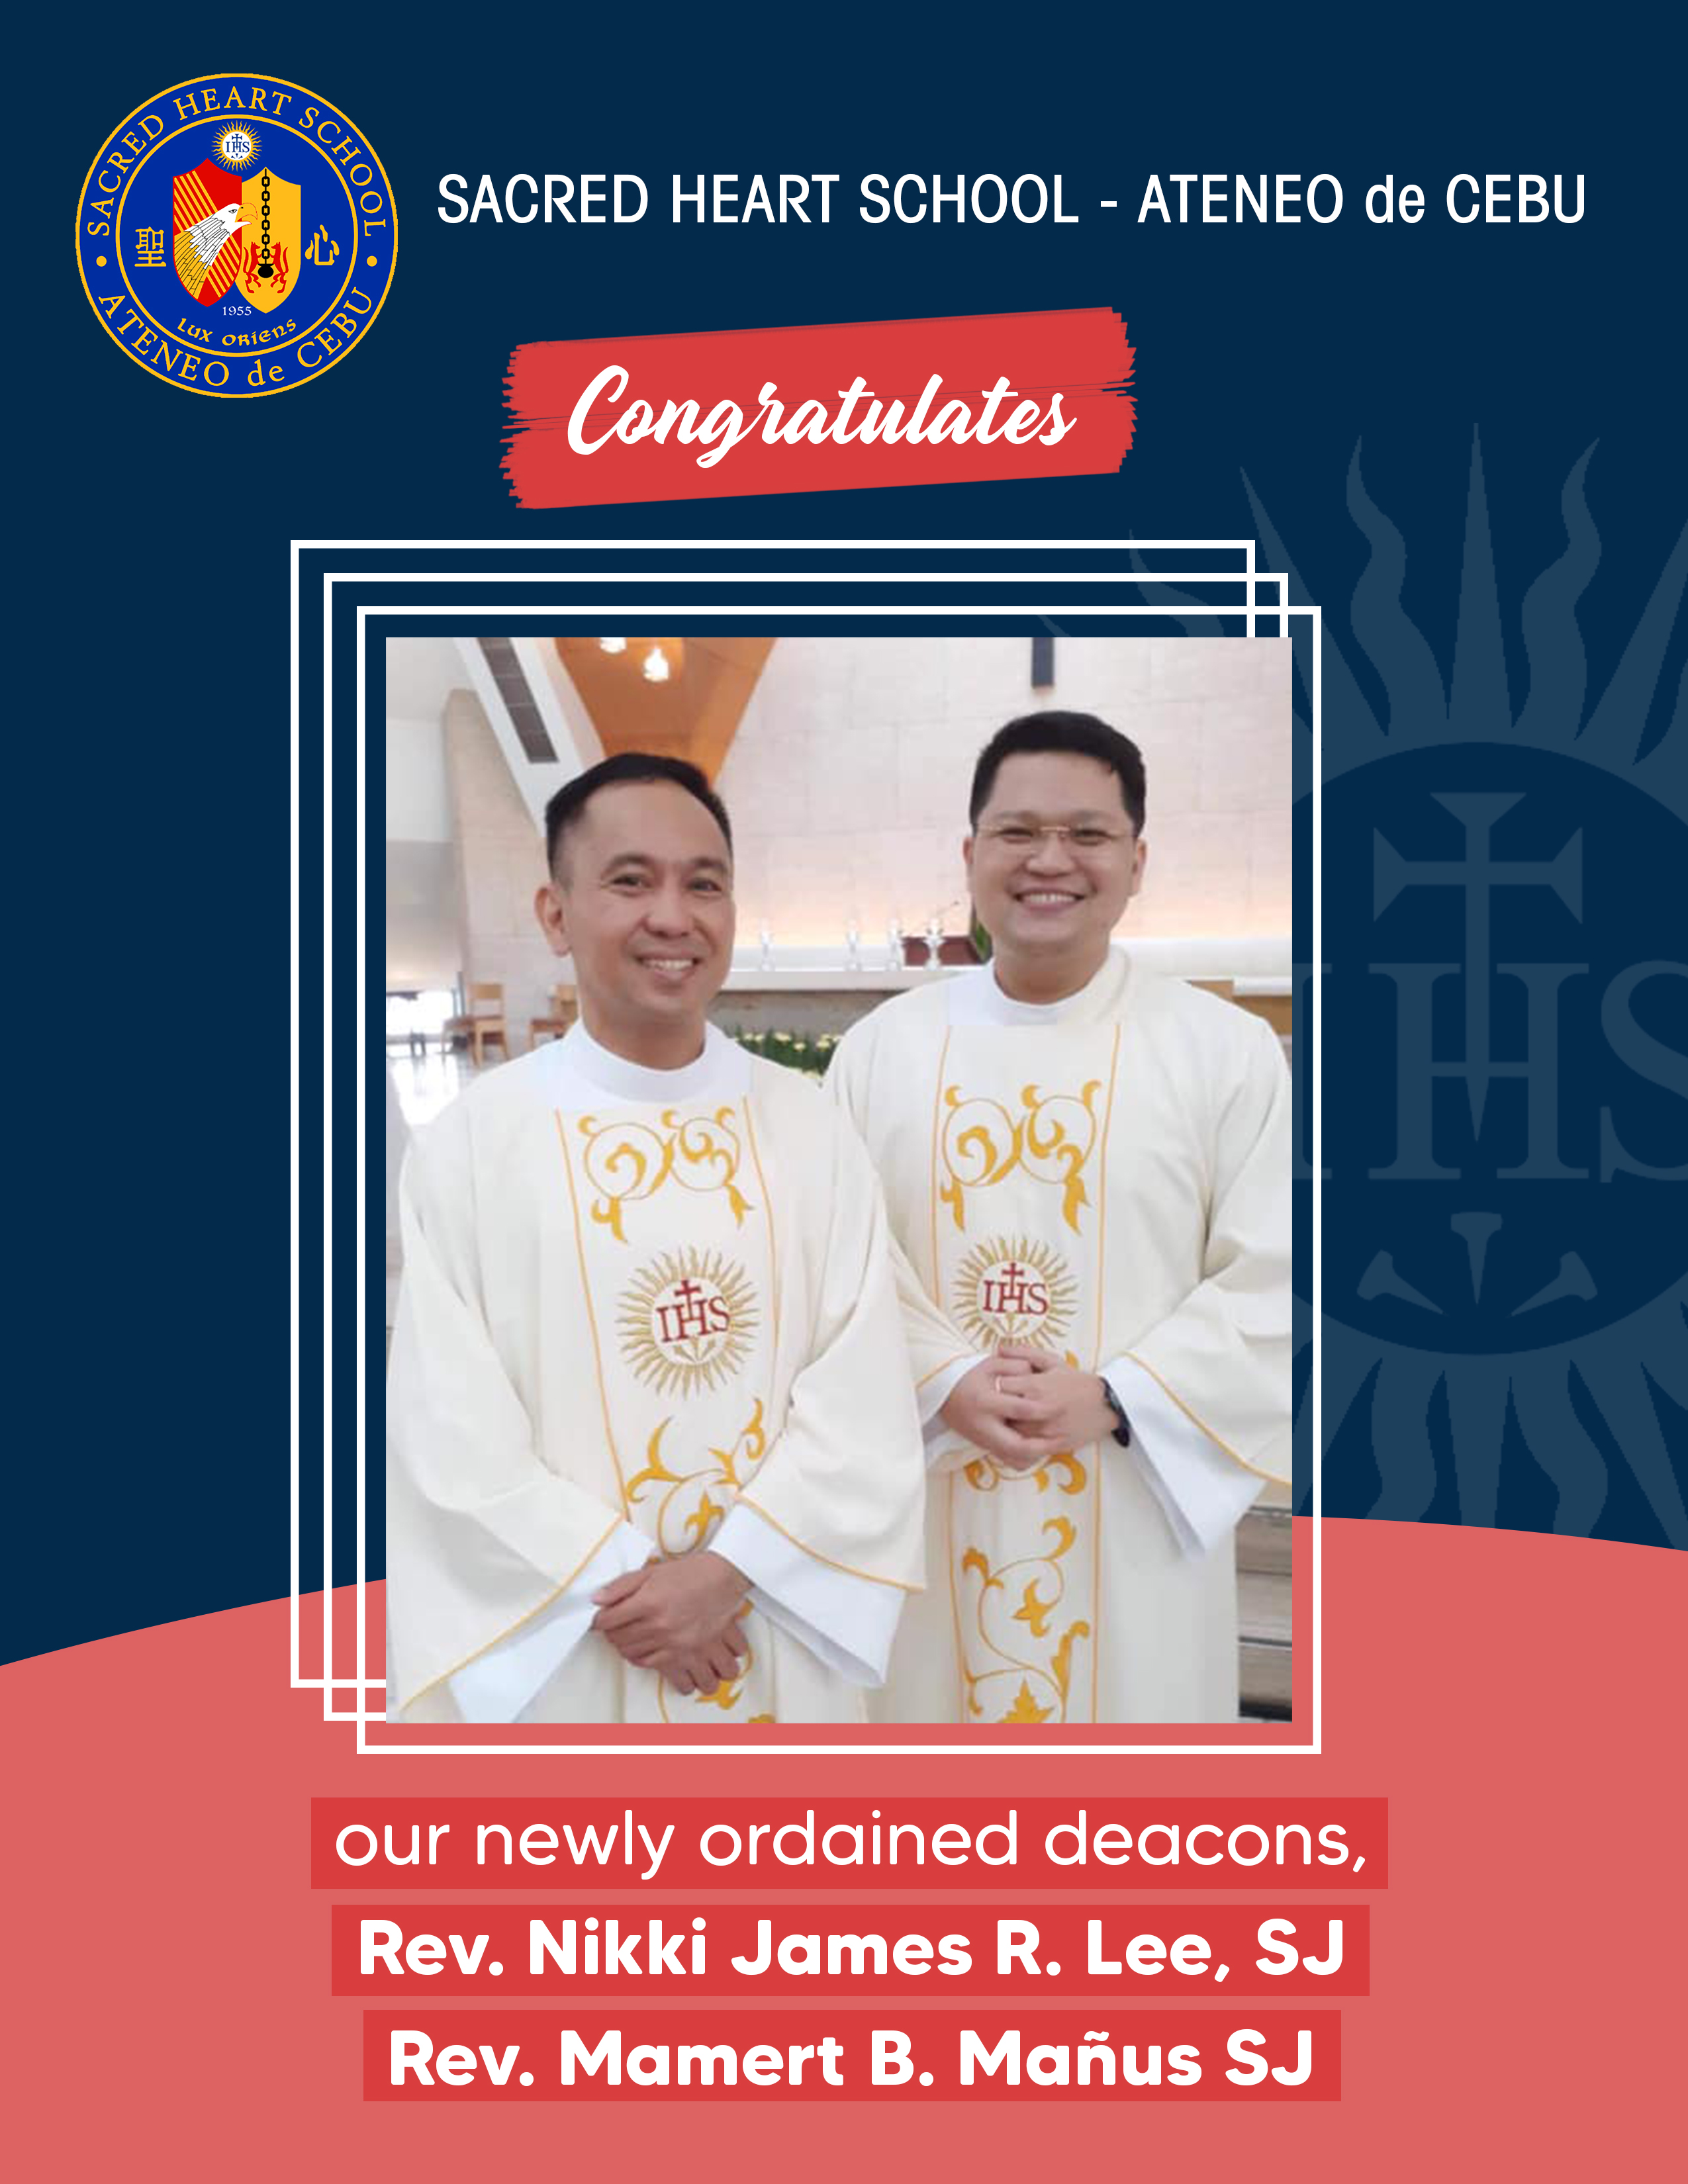 SHS-AdC Congratulates our newly ordained deacons